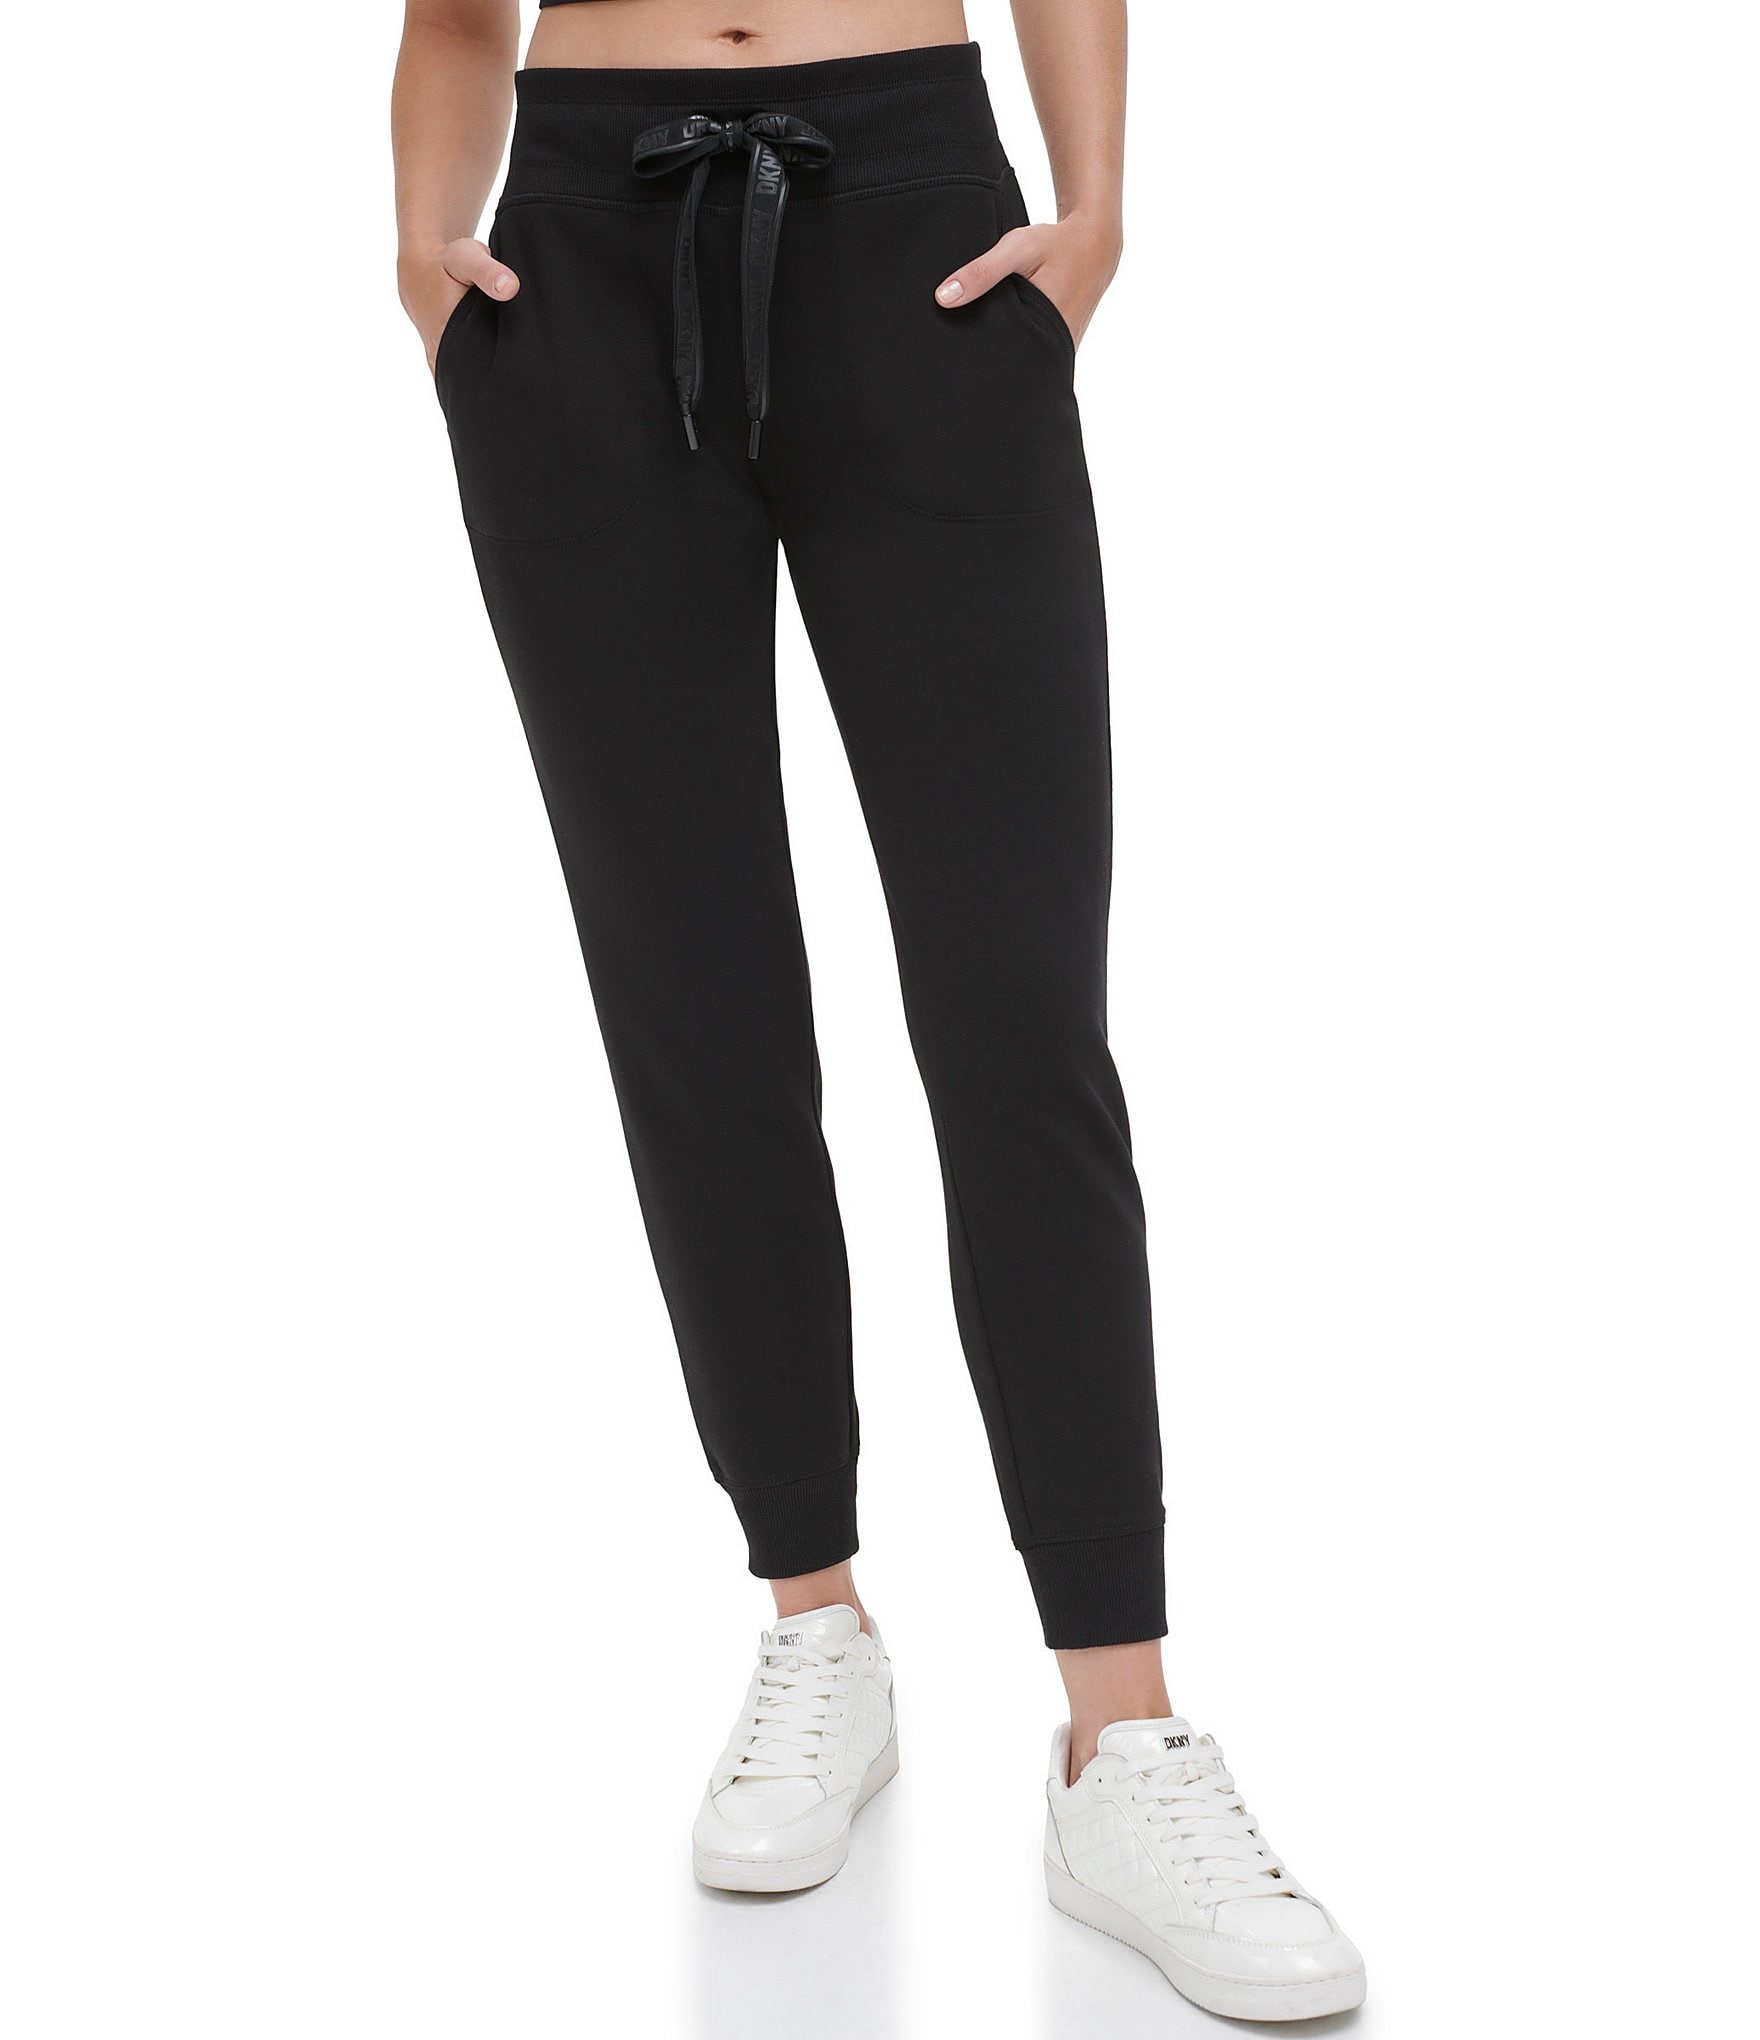 DKNY Sport Sueded Compression High Waisted Ankle Length Leggings